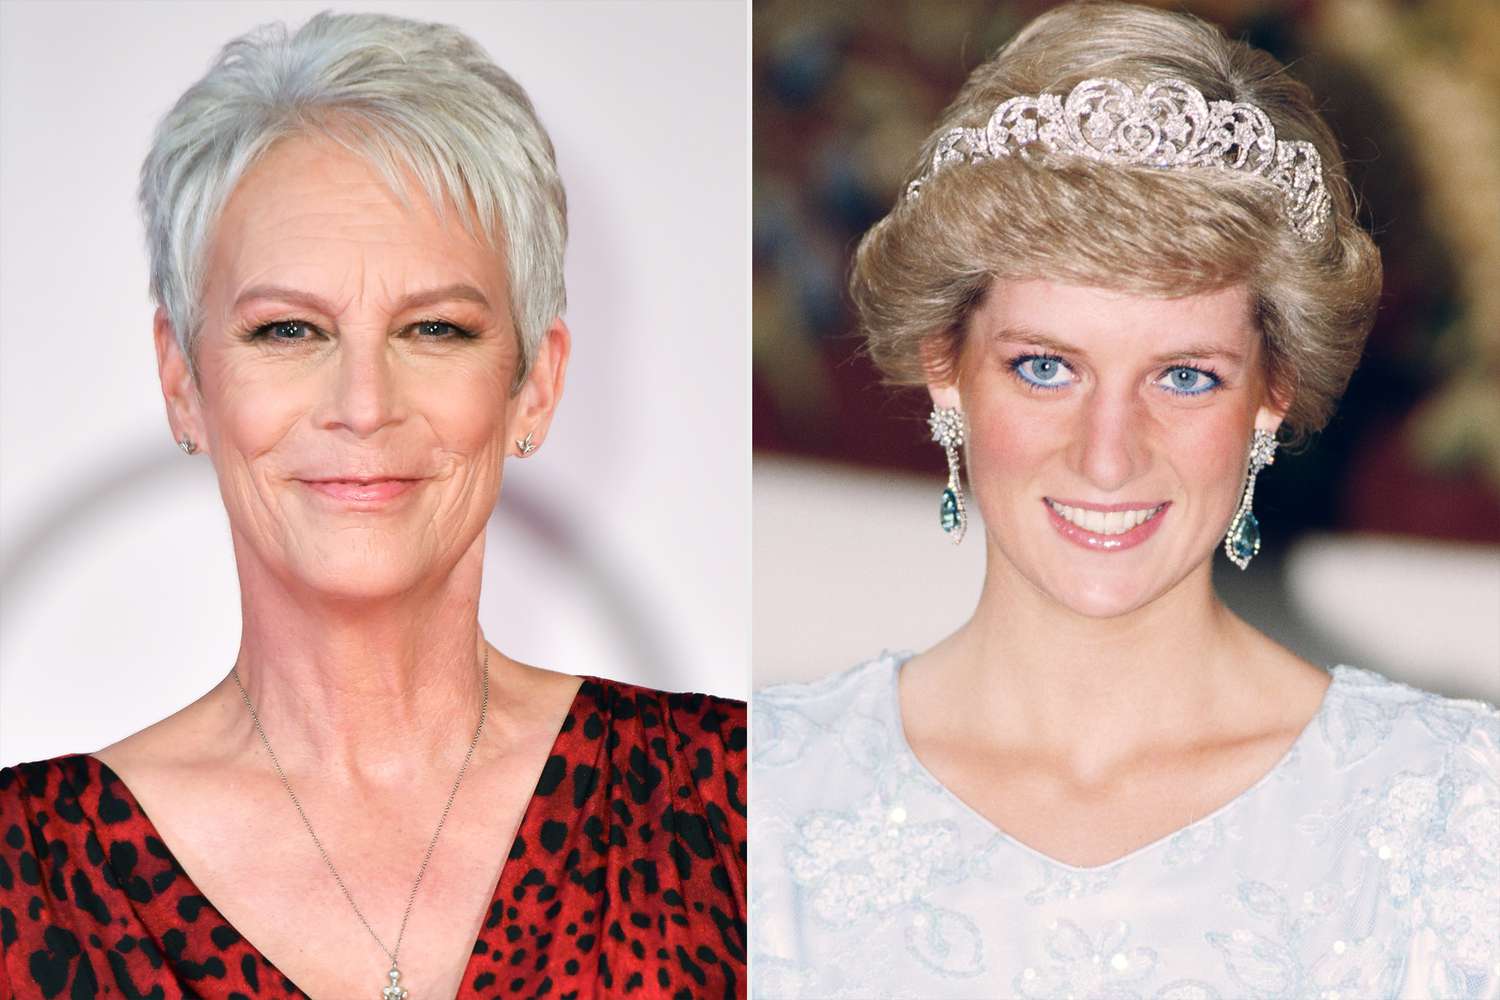 Jamie Lee Curtis' bond with Princess Diana started while peeing 